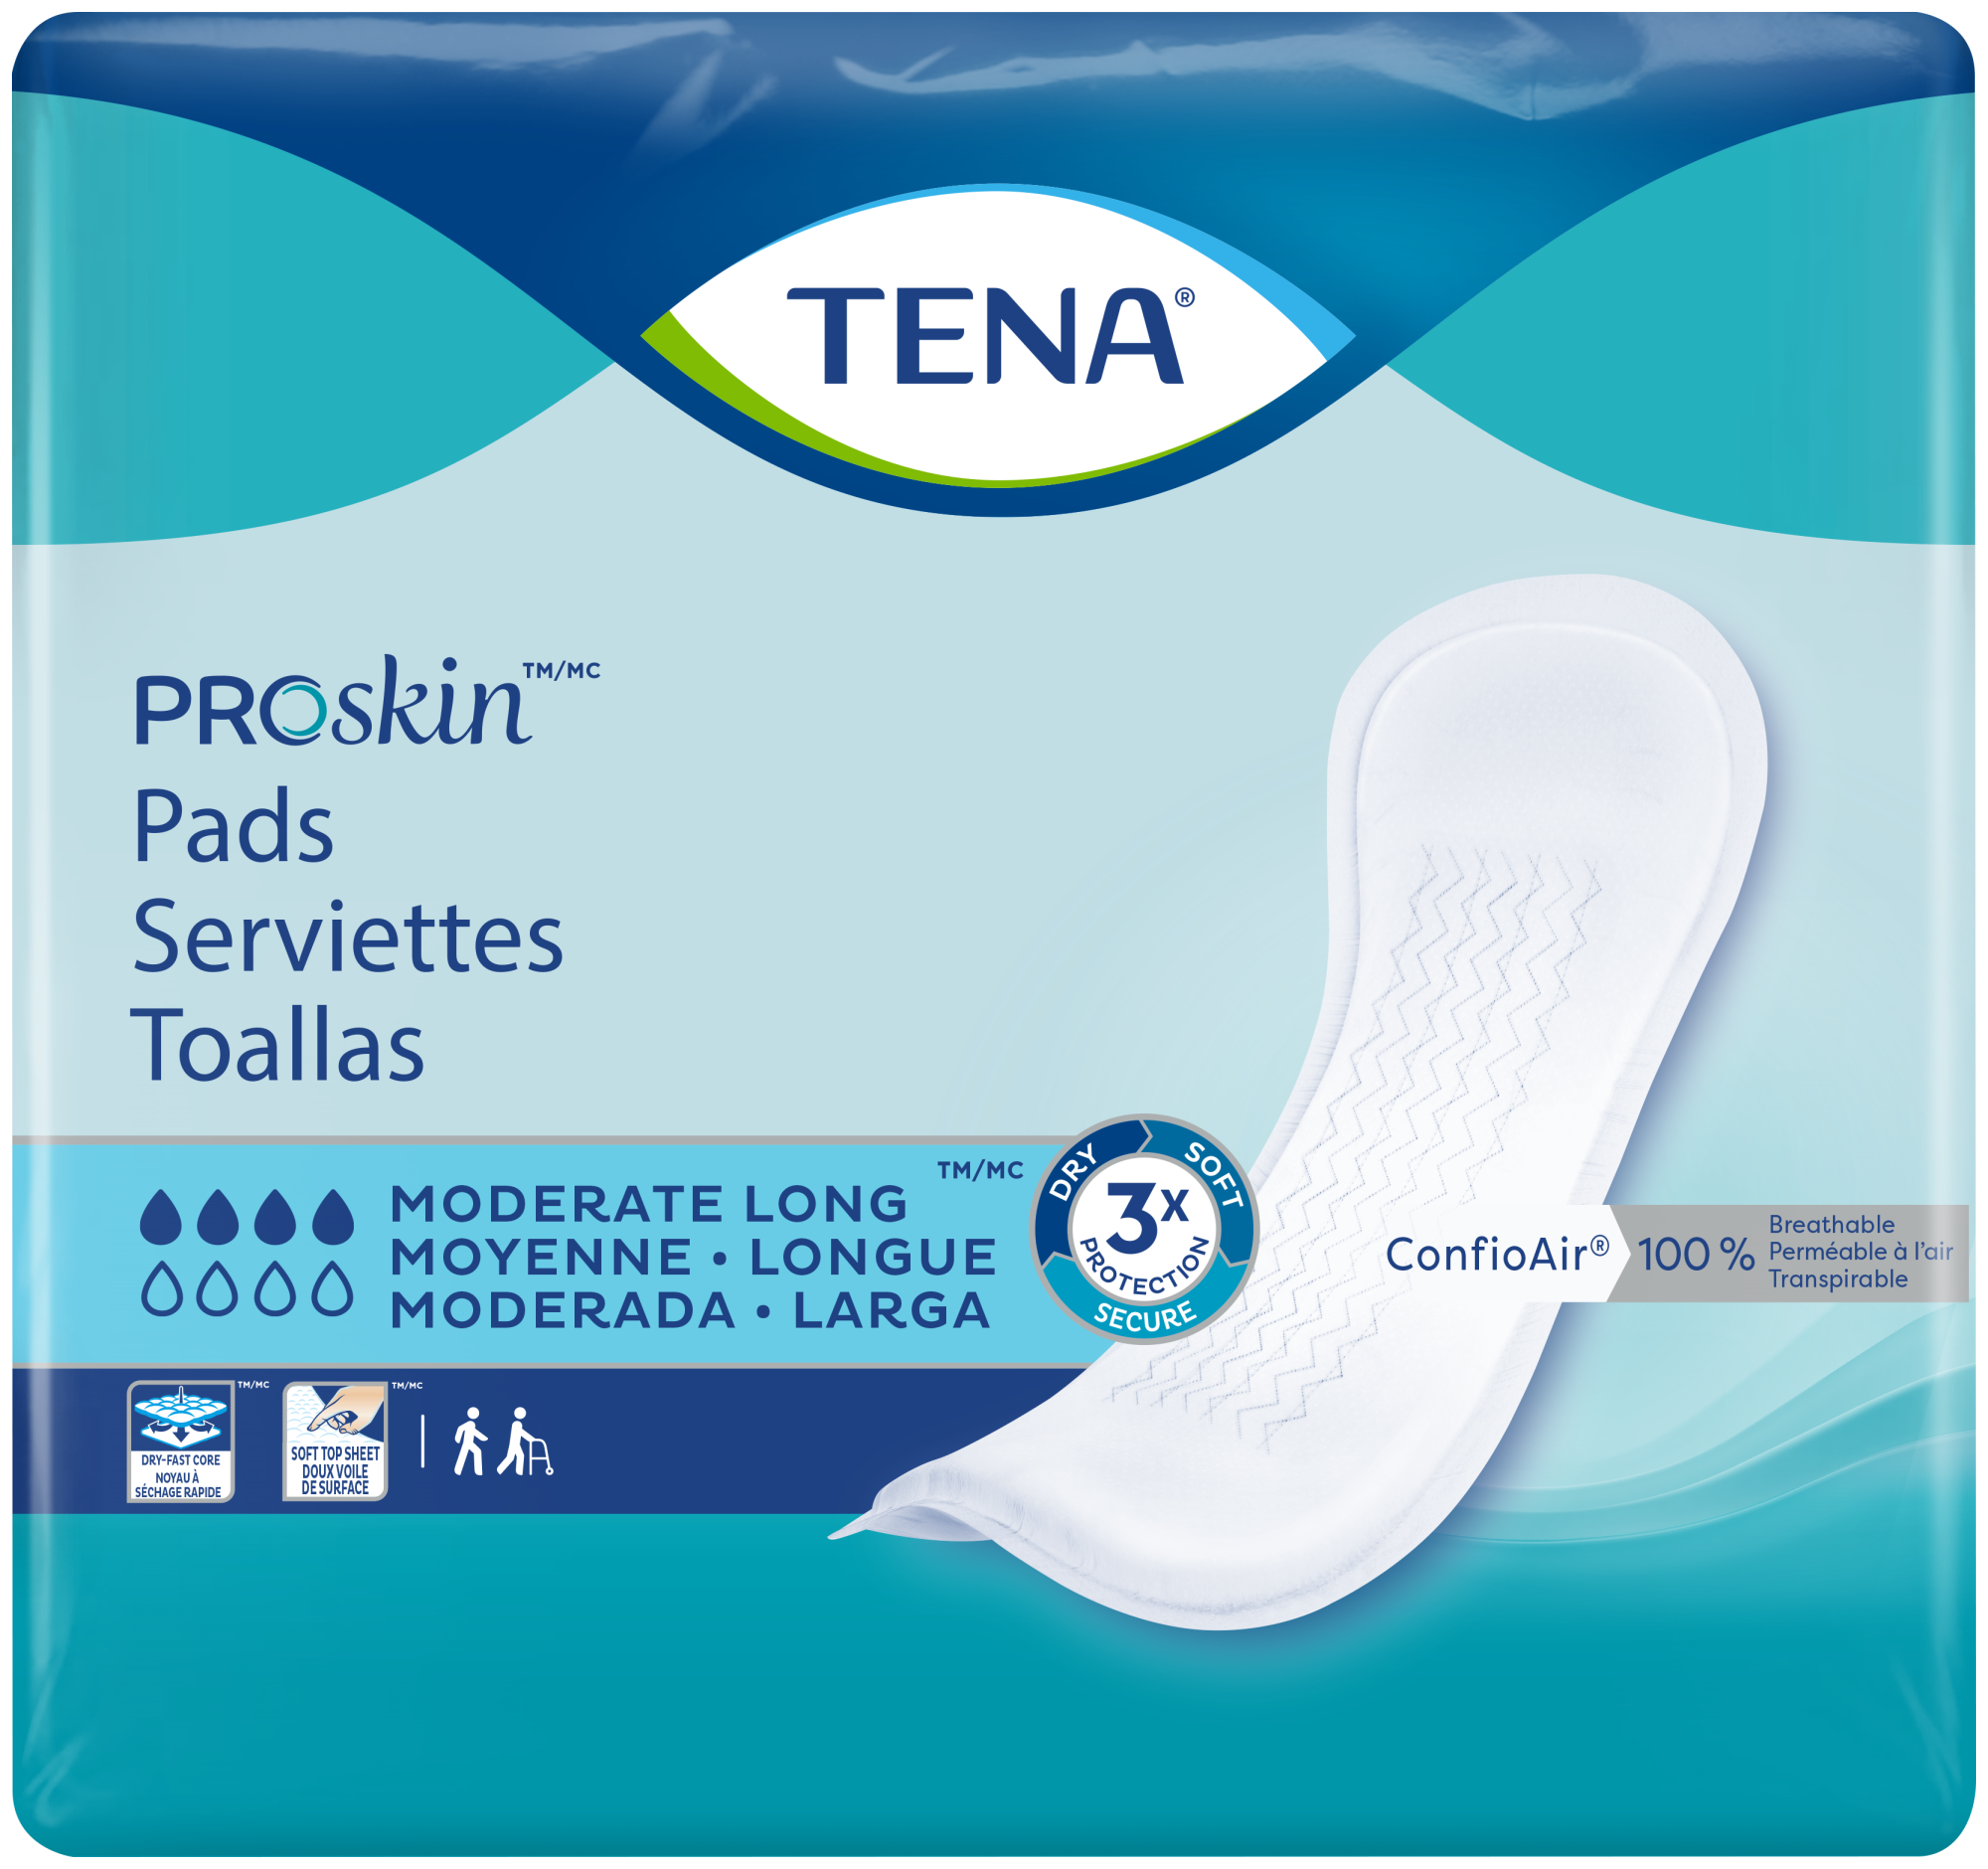 TENA incontinence products –